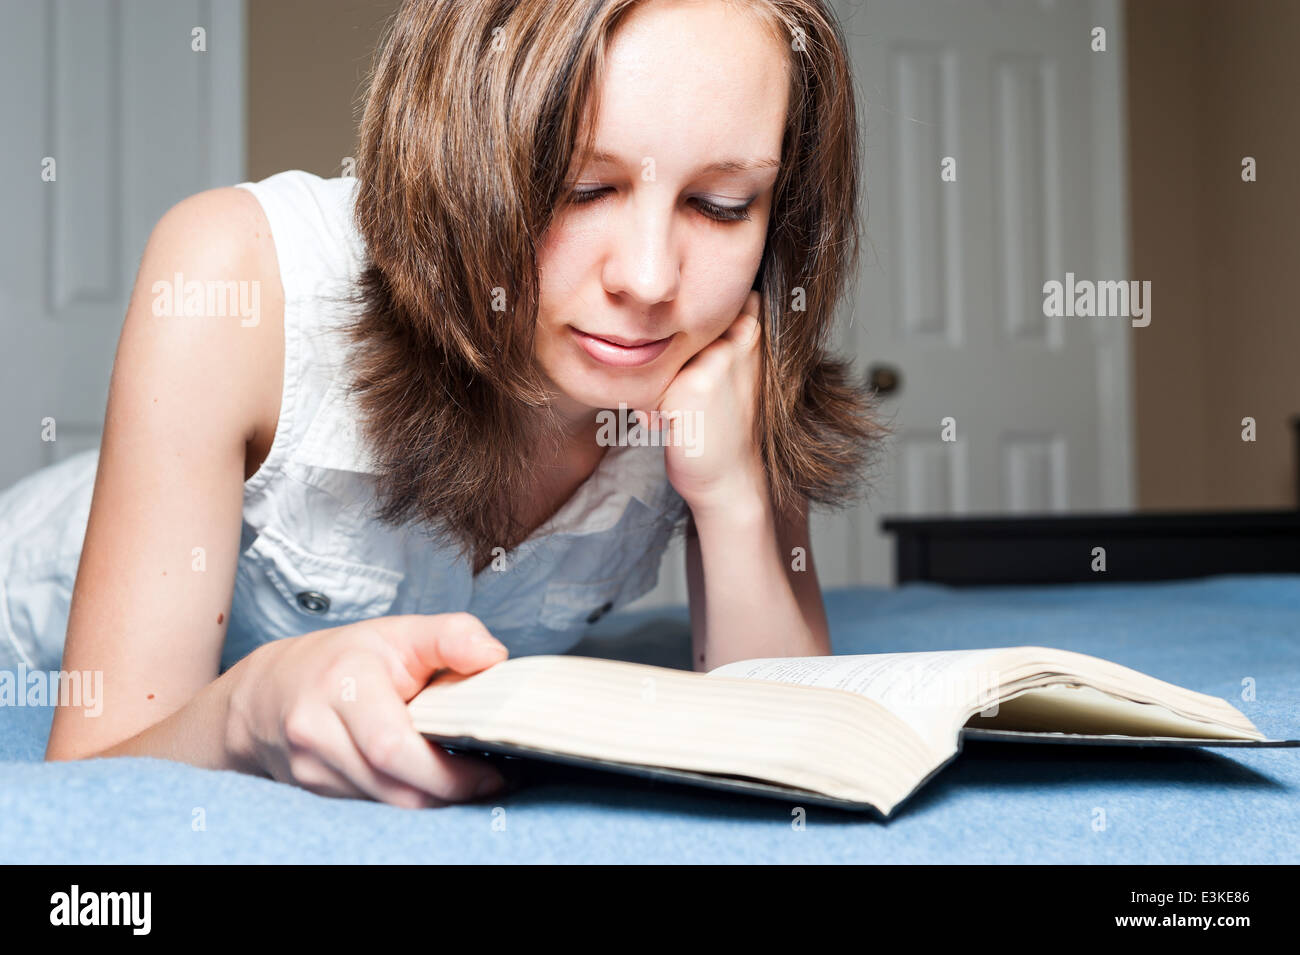 Student girl reading a book Stock Photo